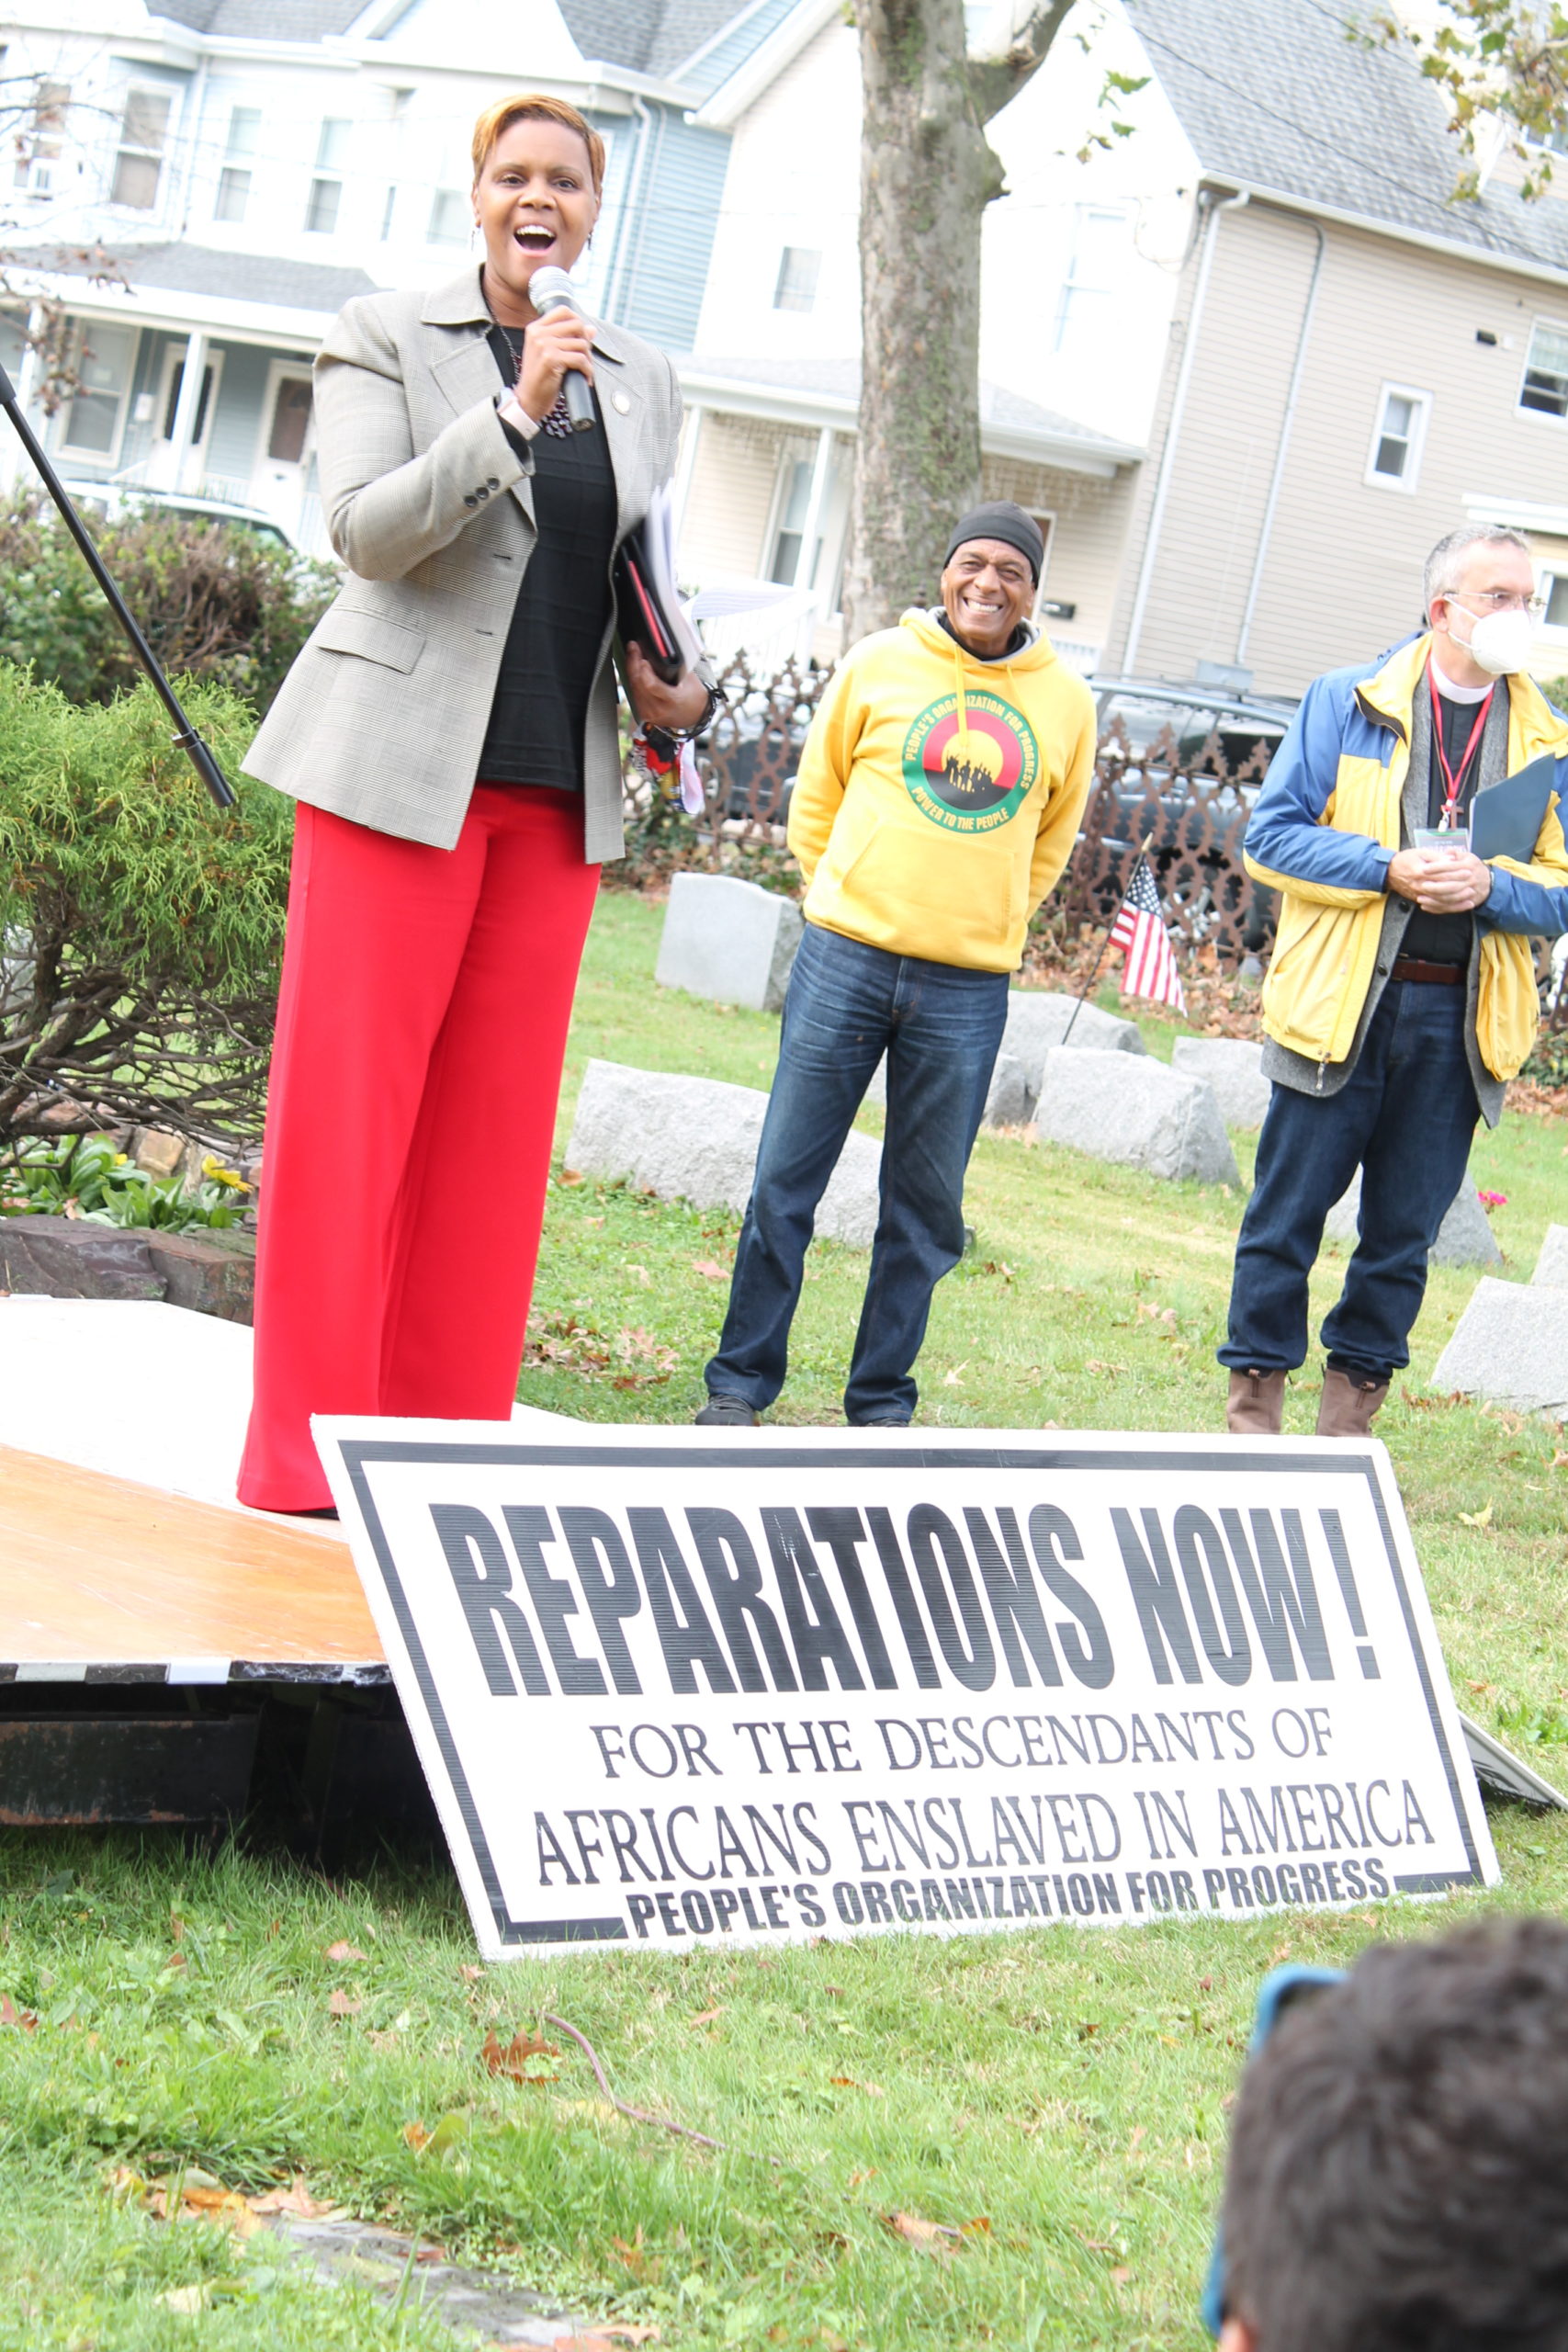 Assemblywoman Shavonda E. Sumter (D), addresses the crowd at the "Say the Word: Reparations" rally on Oct. 30, 2021 at St. Peter's Episcopal Church in Perth Amboy, NJ